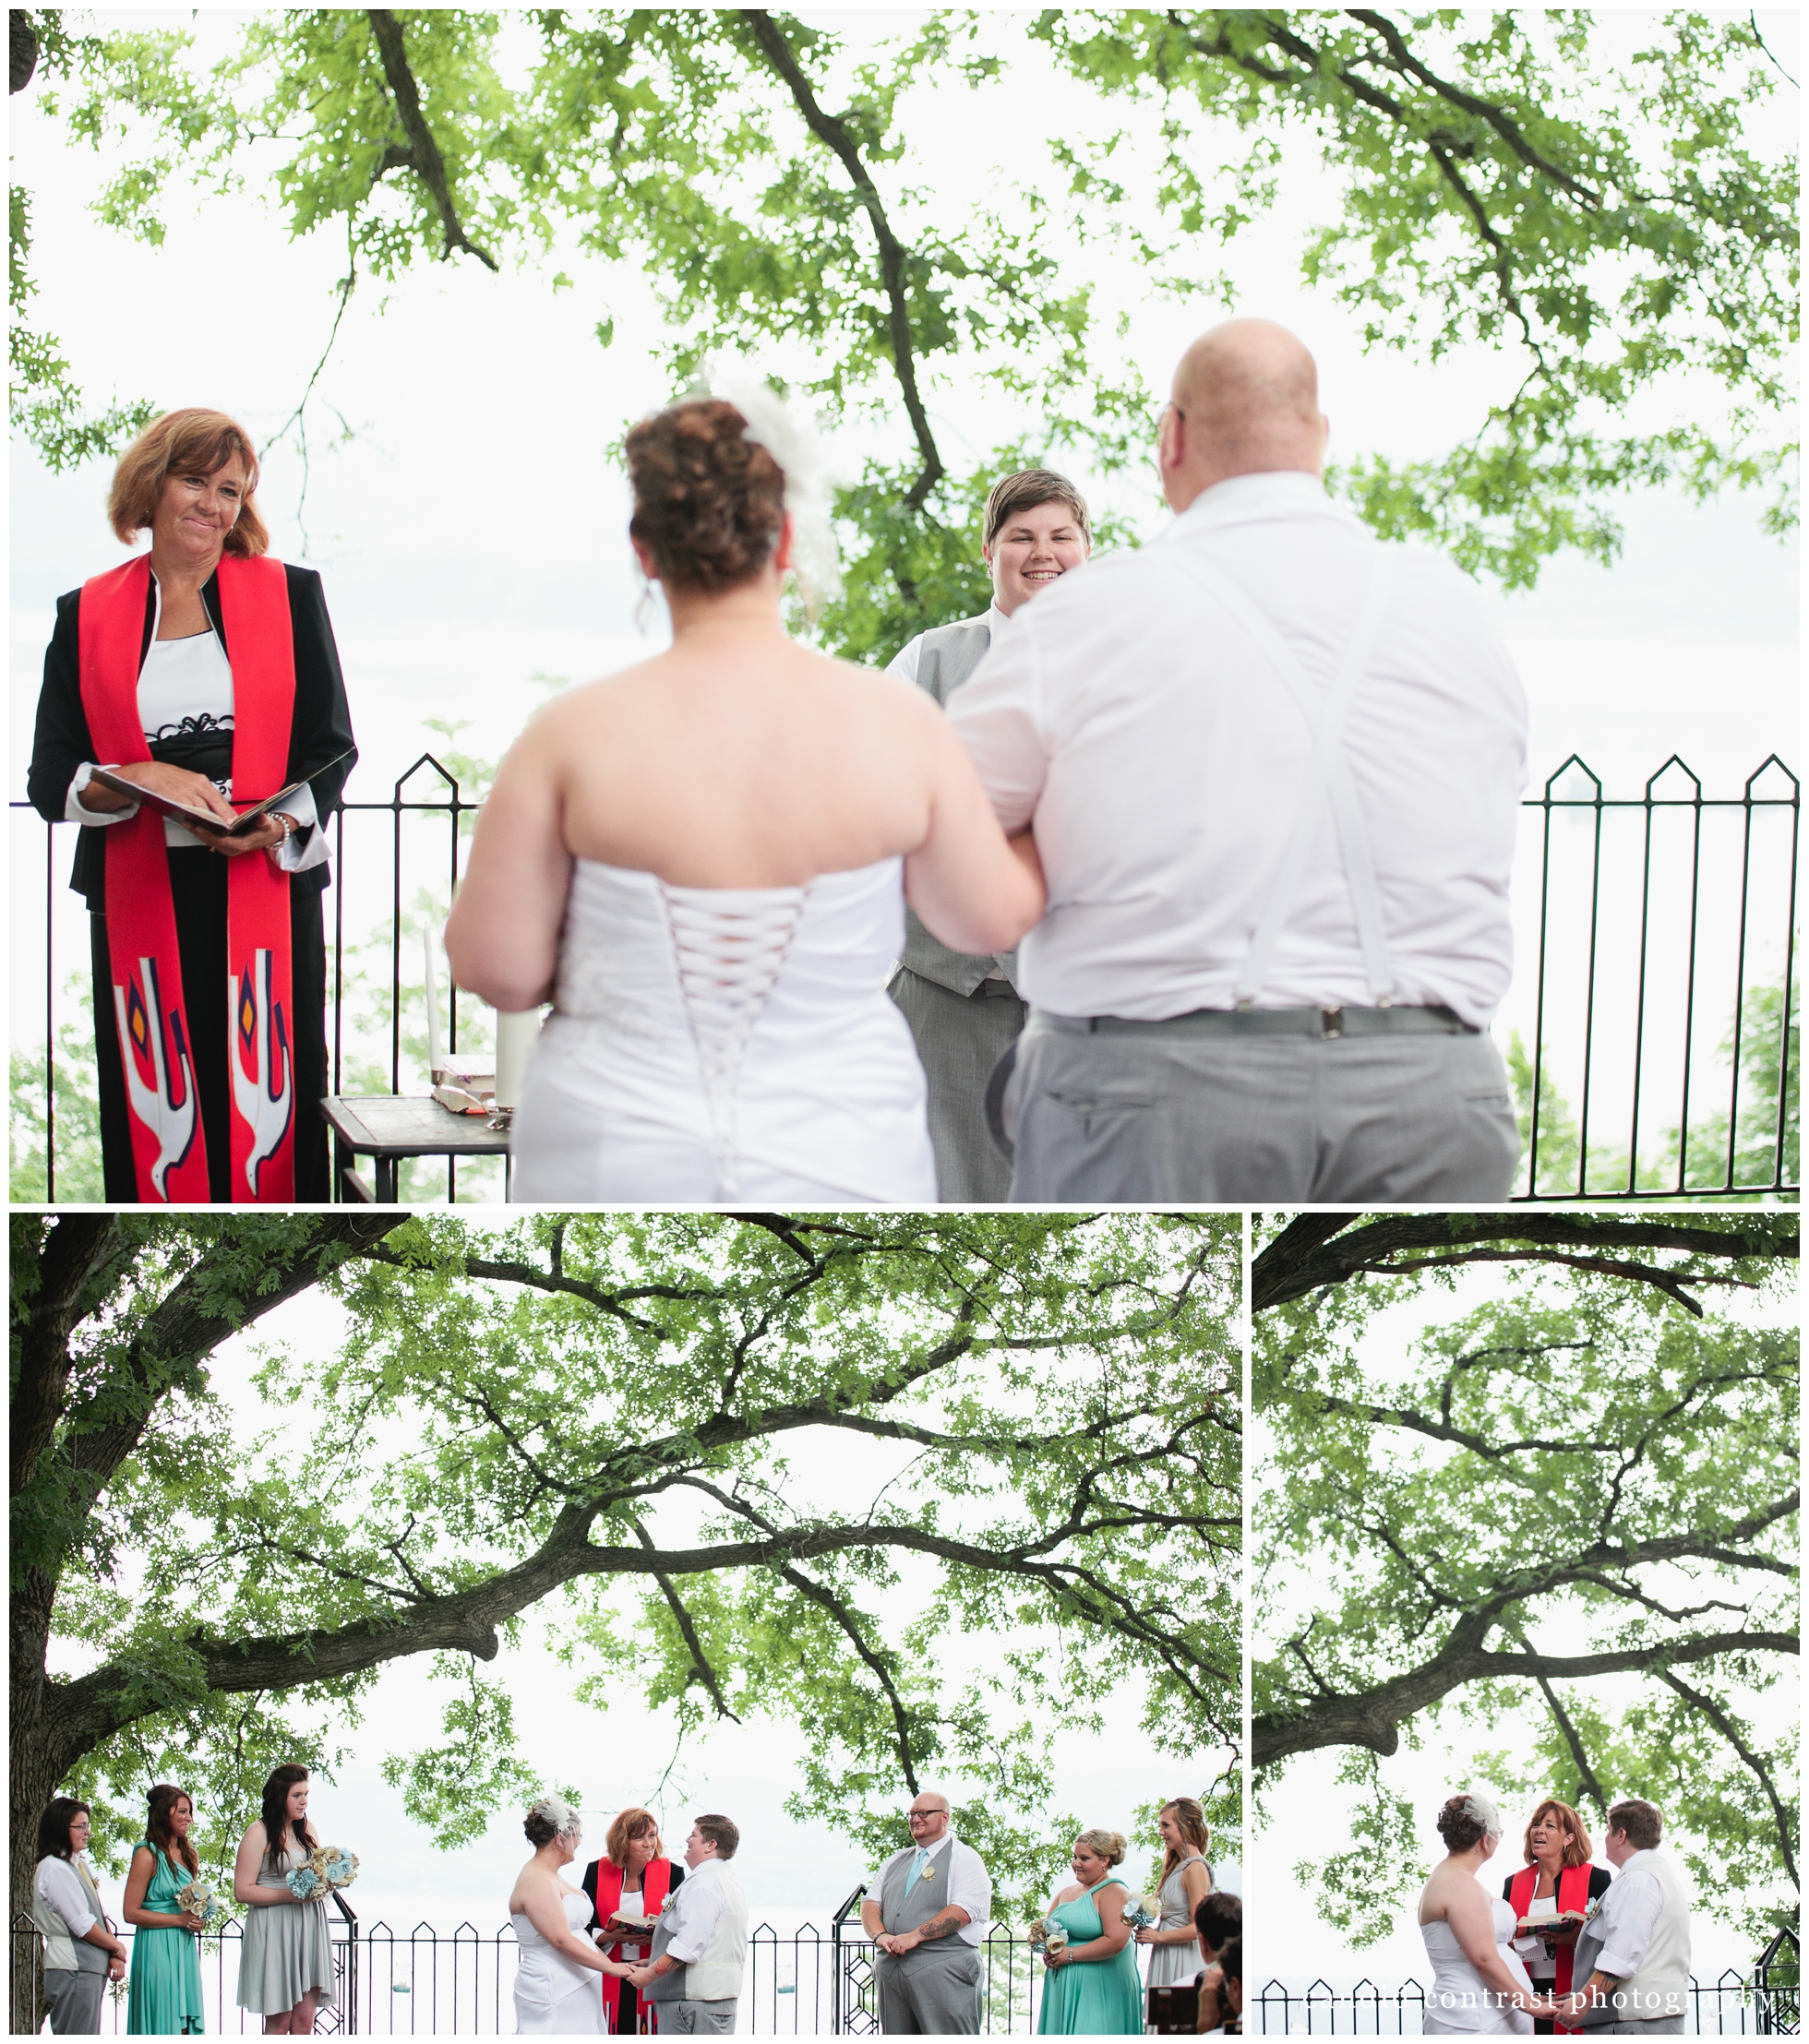 candid wedding moments at eagle point park same sex wedding ceremony dubuque iowa wedding, candid contrast photography